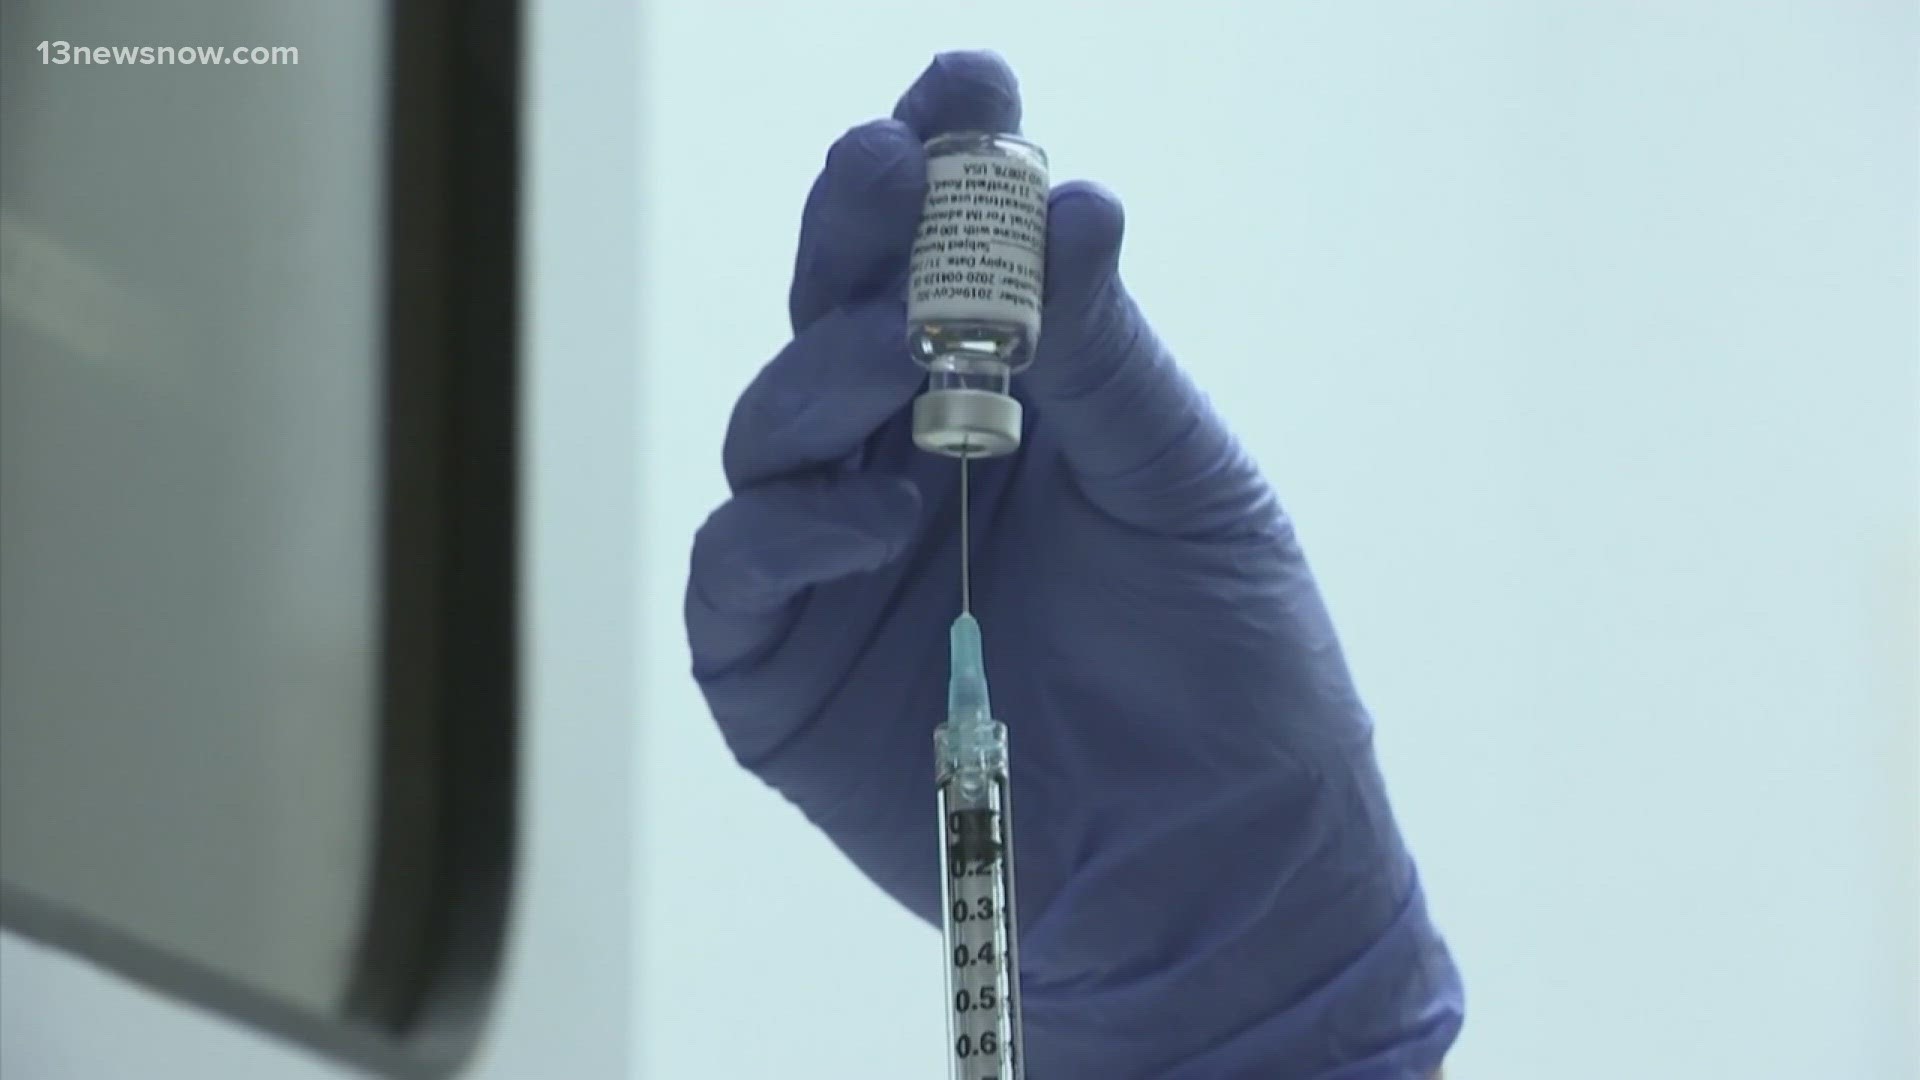 In the lawsuit, the employee claims she was fired in 2021 because she opted out of getting a COVID-19 vaccine and had problems with getting tested weekly.